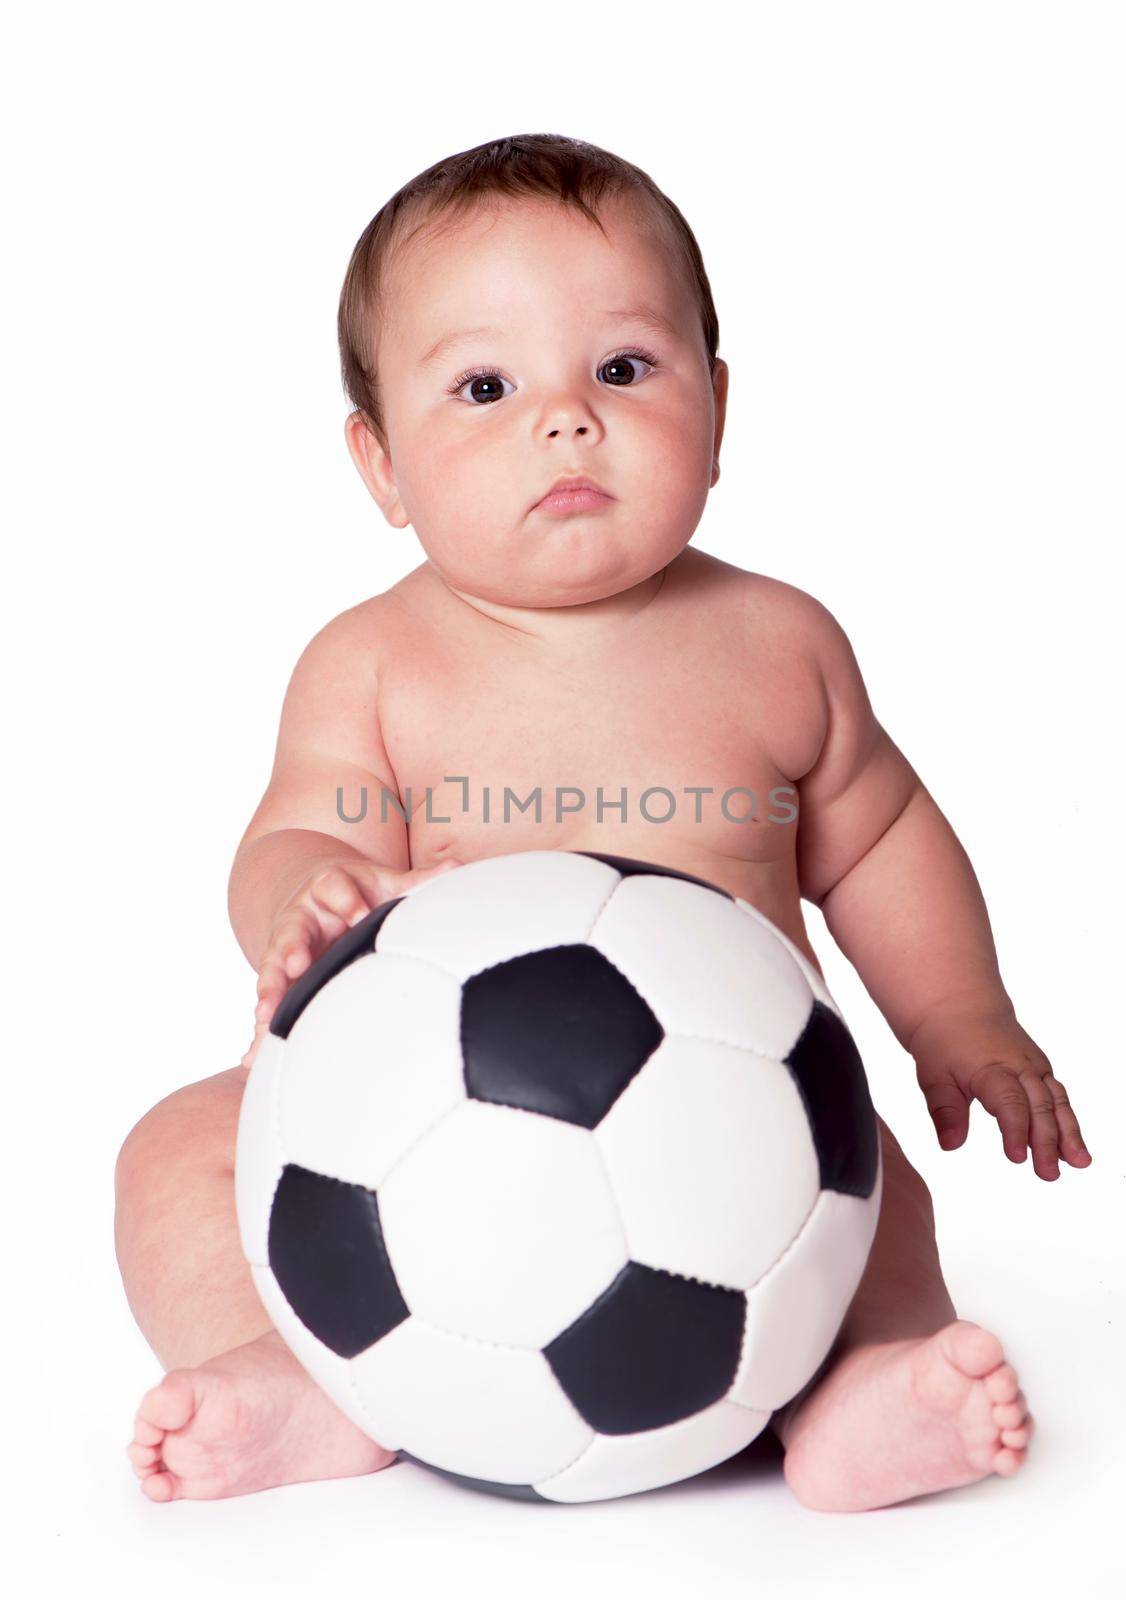 Child with soccer ball All on white background by aprilphoto